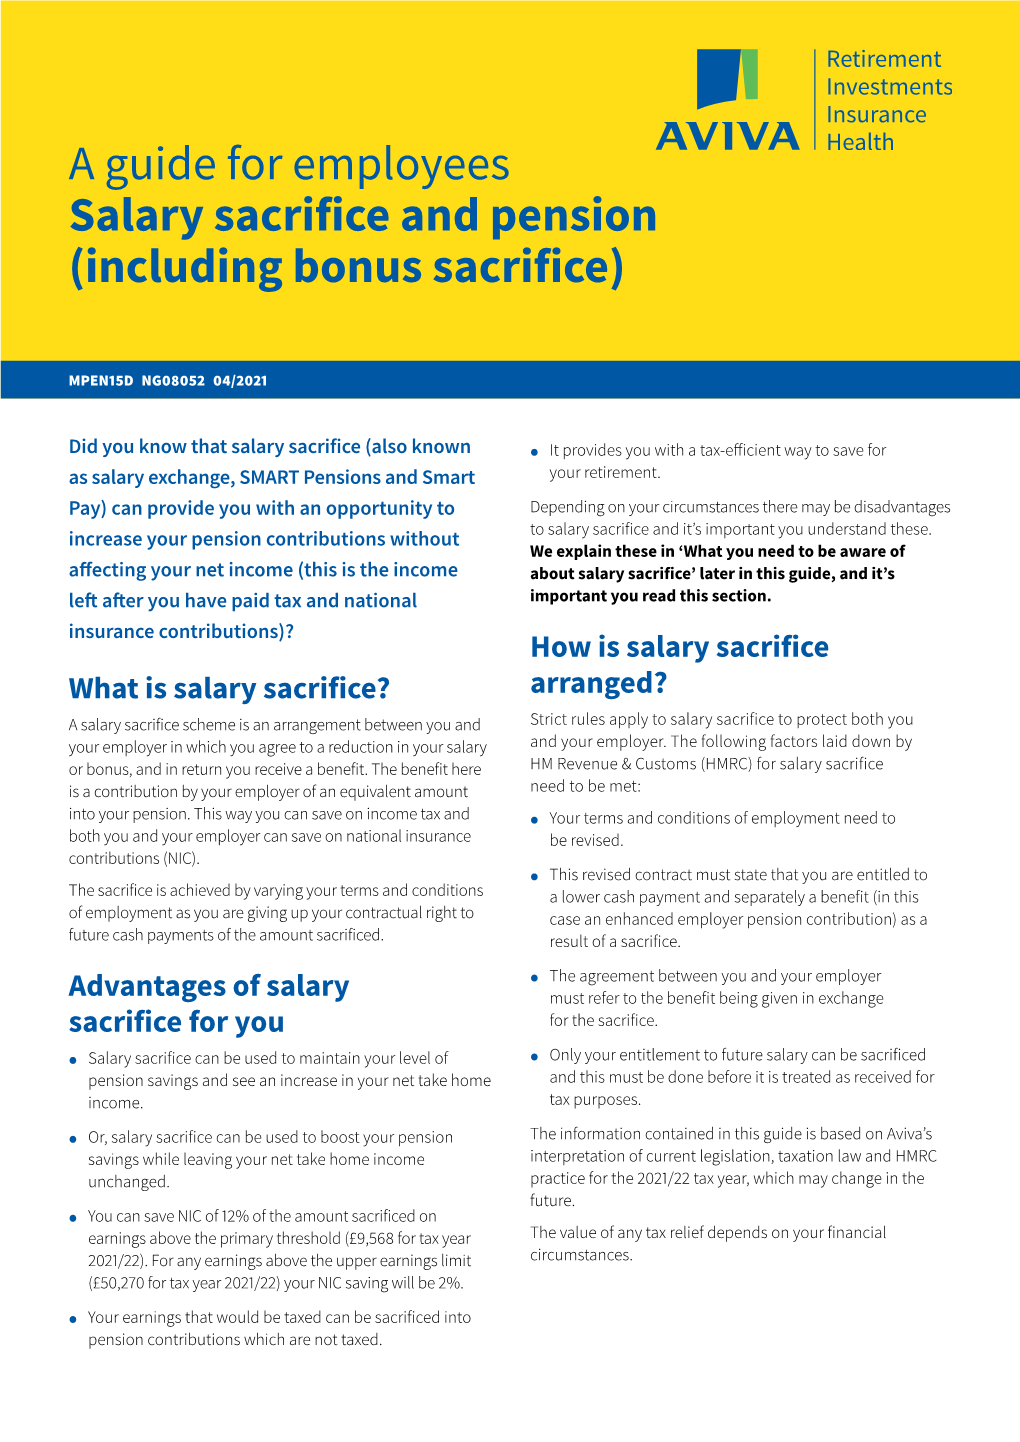 A Guide for Employees Salary Sacrifice and Pension (Including Bonus Sacrifice)